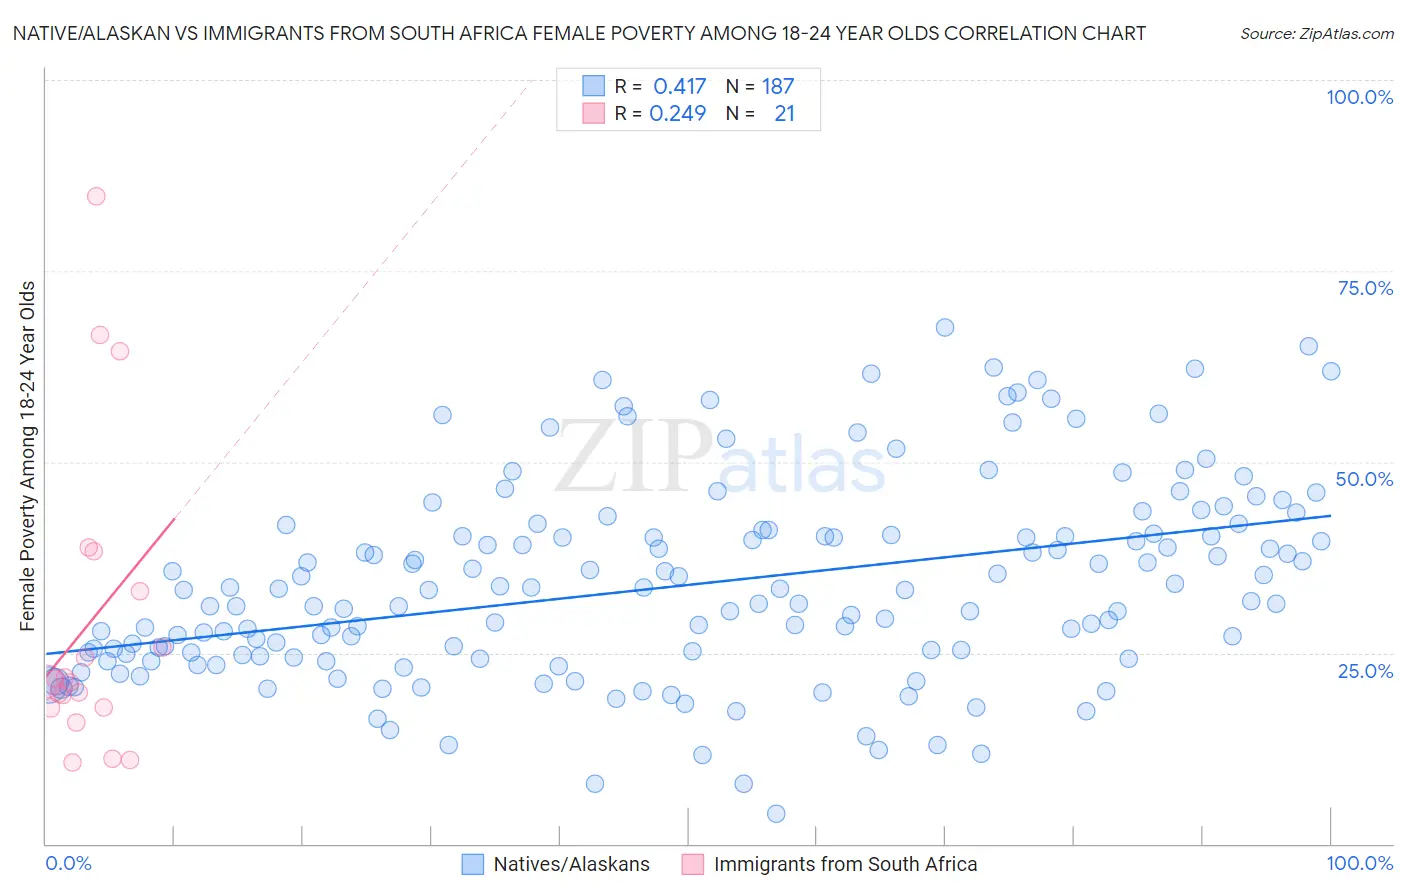 Native/Alaskan vs Immigrants from South Africa Female Poverty Among 18-24 Year Olds